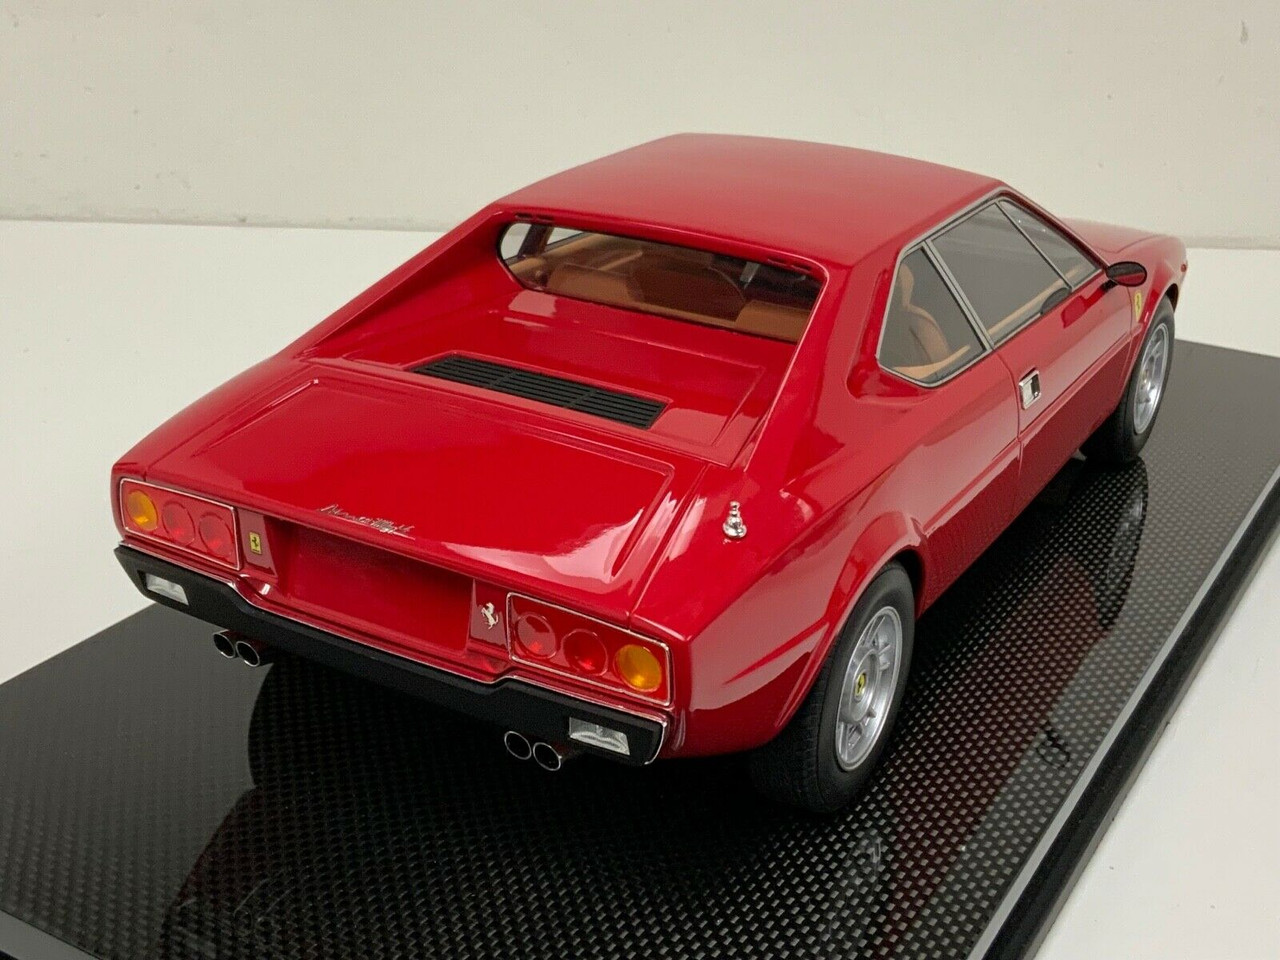 1/12 Top Marques Ferrari 308 GT4 Dino (Red) with Carbon Fiber Base Display Case Resin Car Model